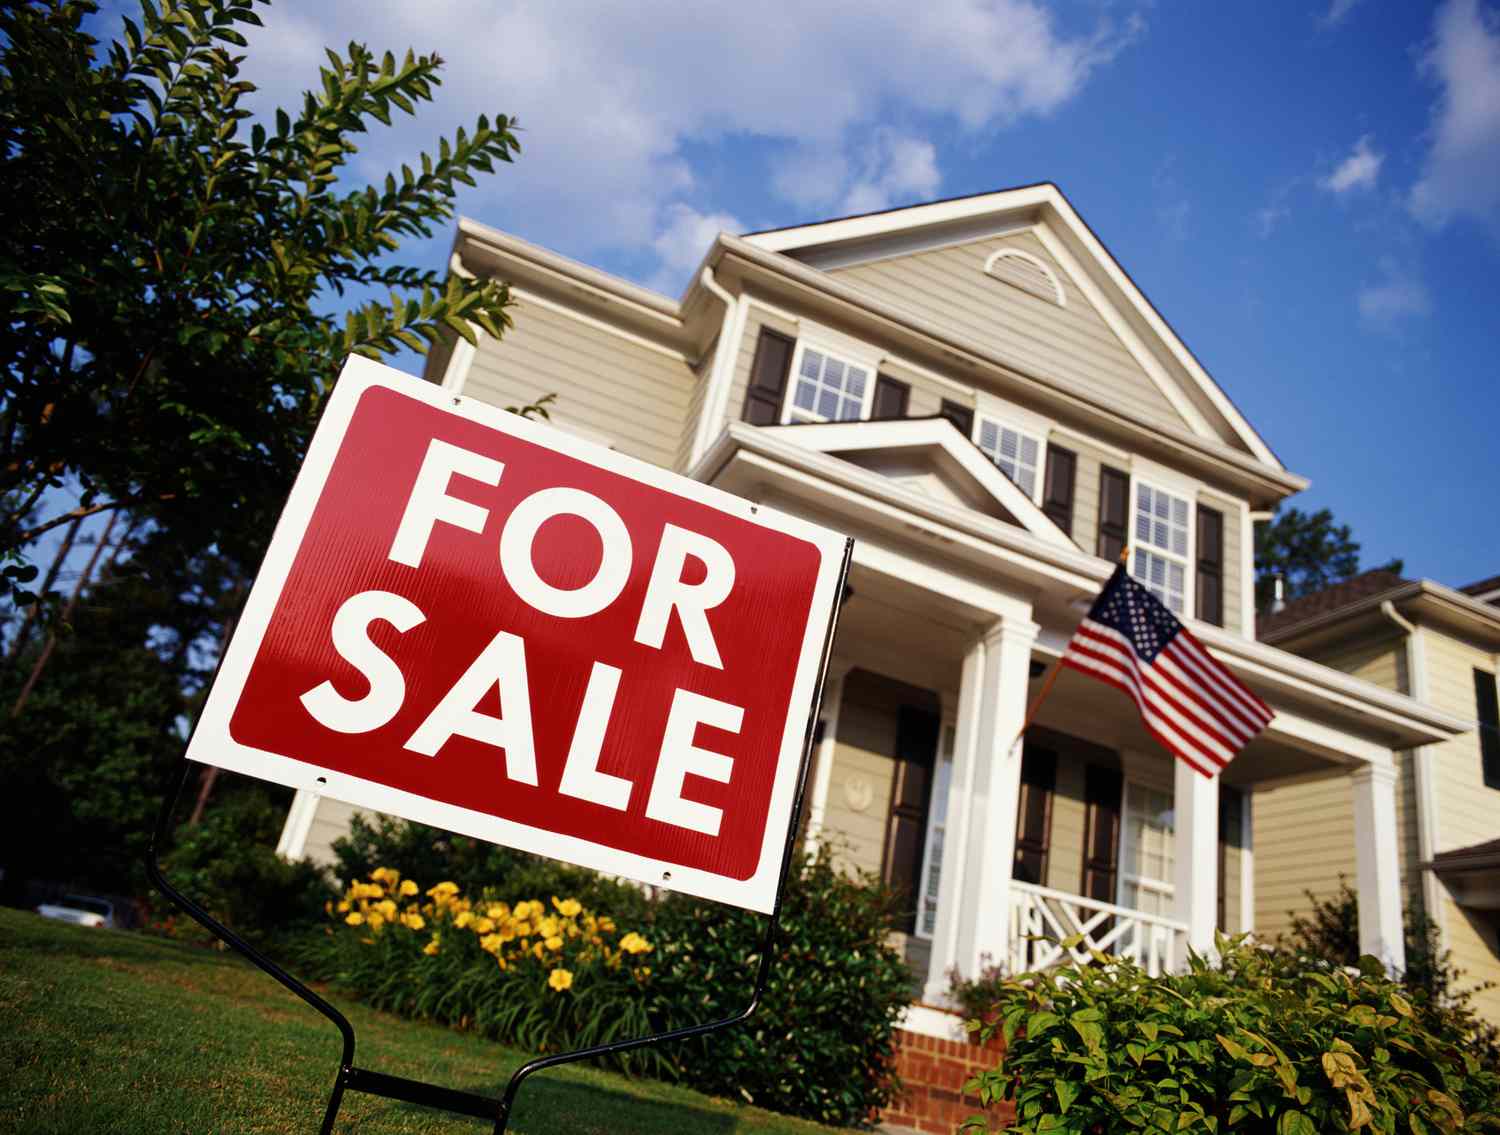 From Listing to Closing: How to Maximize Your Home Selling Potential in a Competitive Market